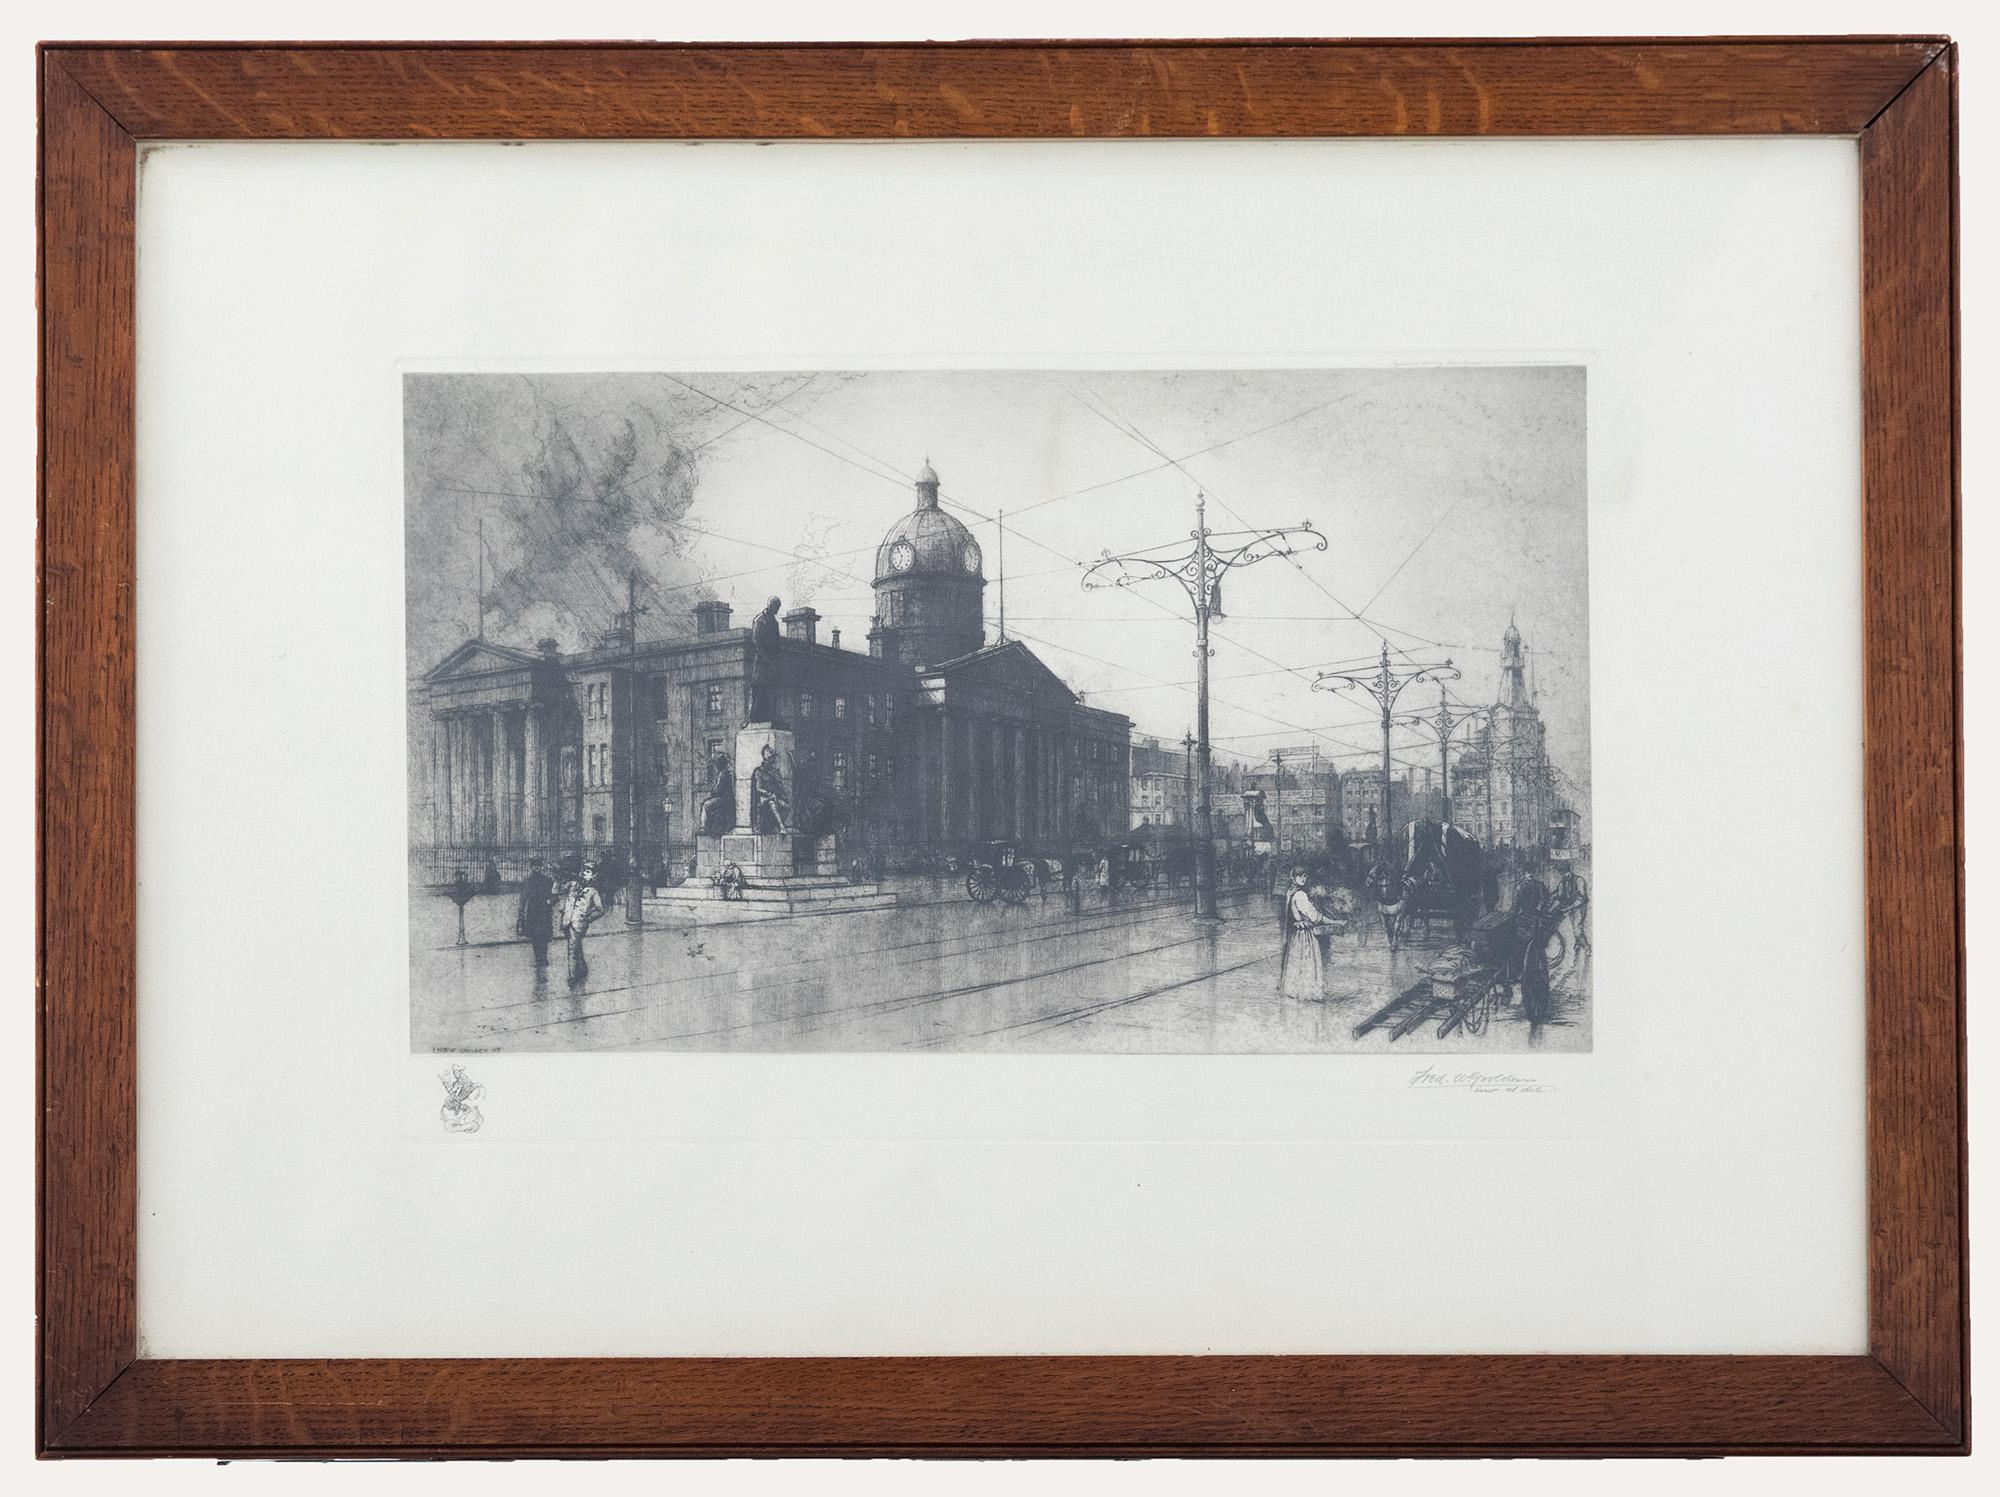 This striking monochrome etching from 1909, shows Manchester's Royal Infirmary with figures, trams and horse drawn carriages out front in Piccadilly Gardens. The etching has been signed and dated in plate to the lower left, with the publishers